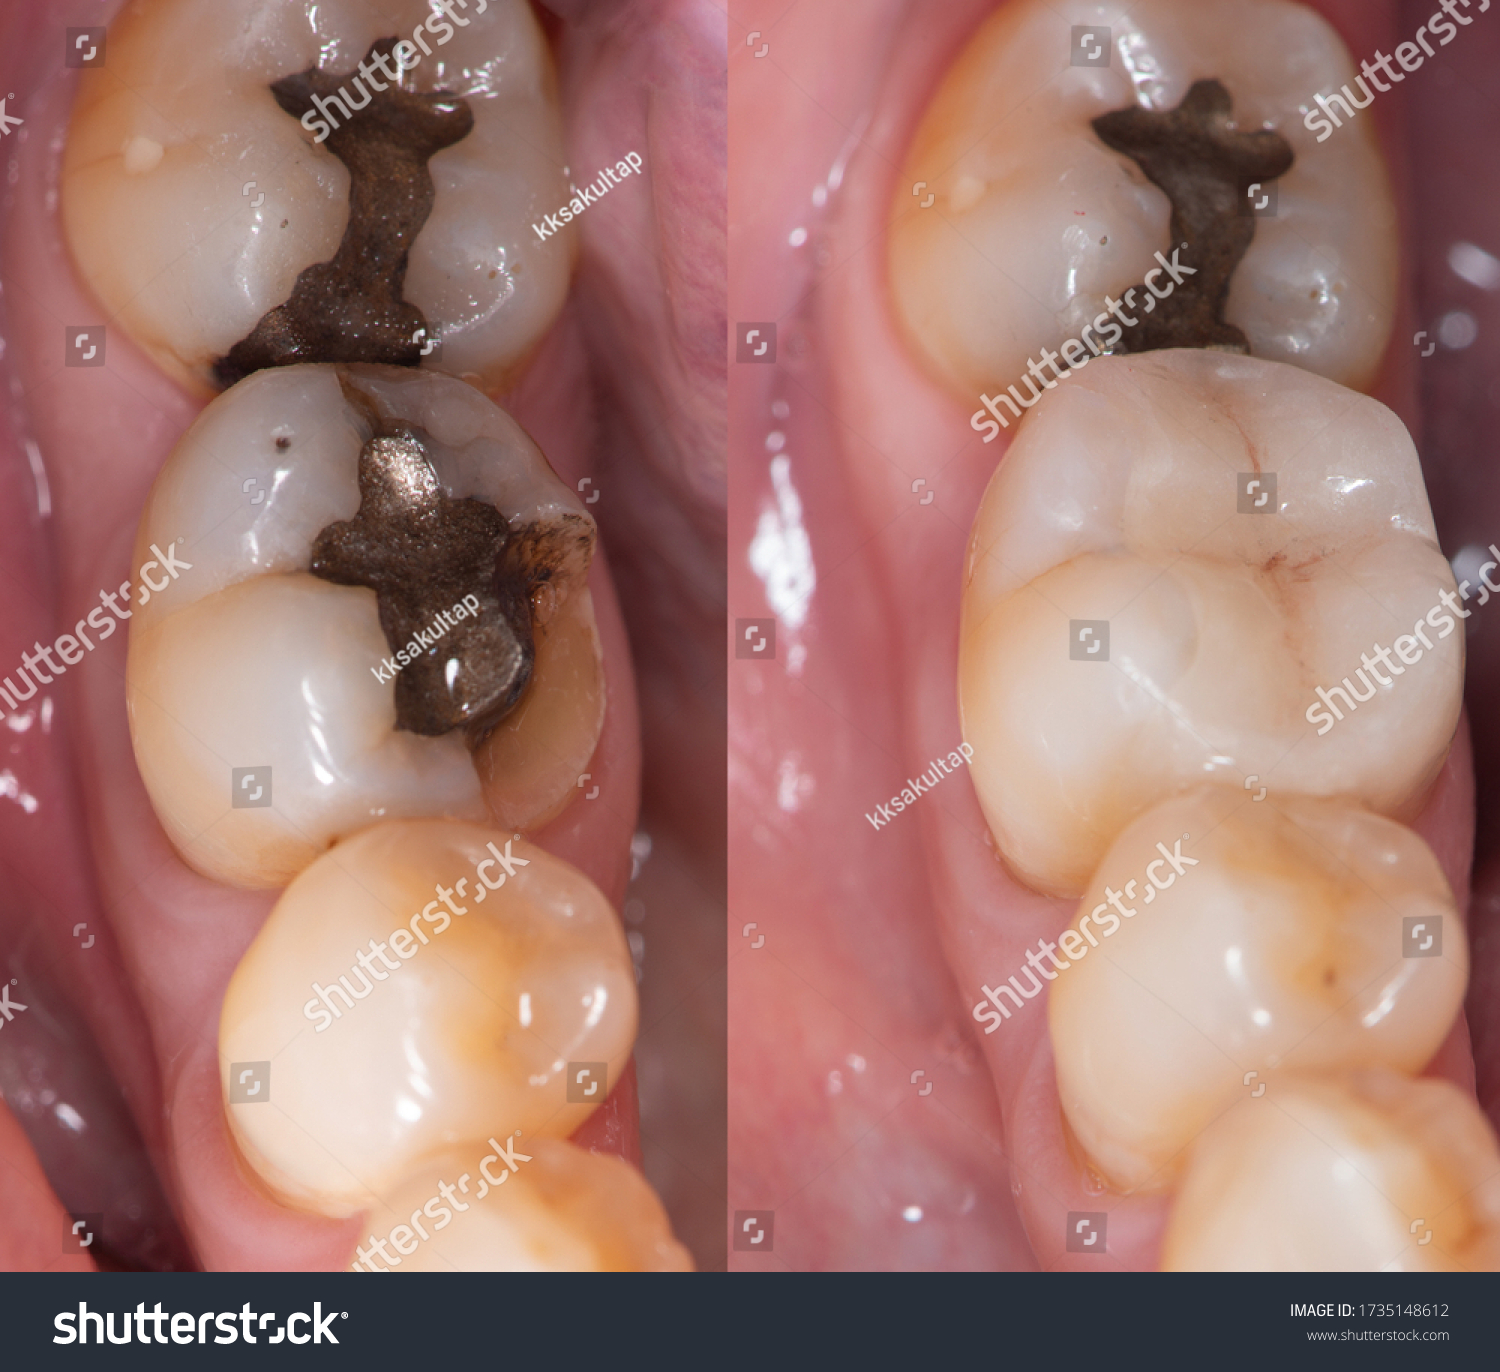 Dental collage, closeup of teeth before and after dental ceramic onlay treatment. #1735148612